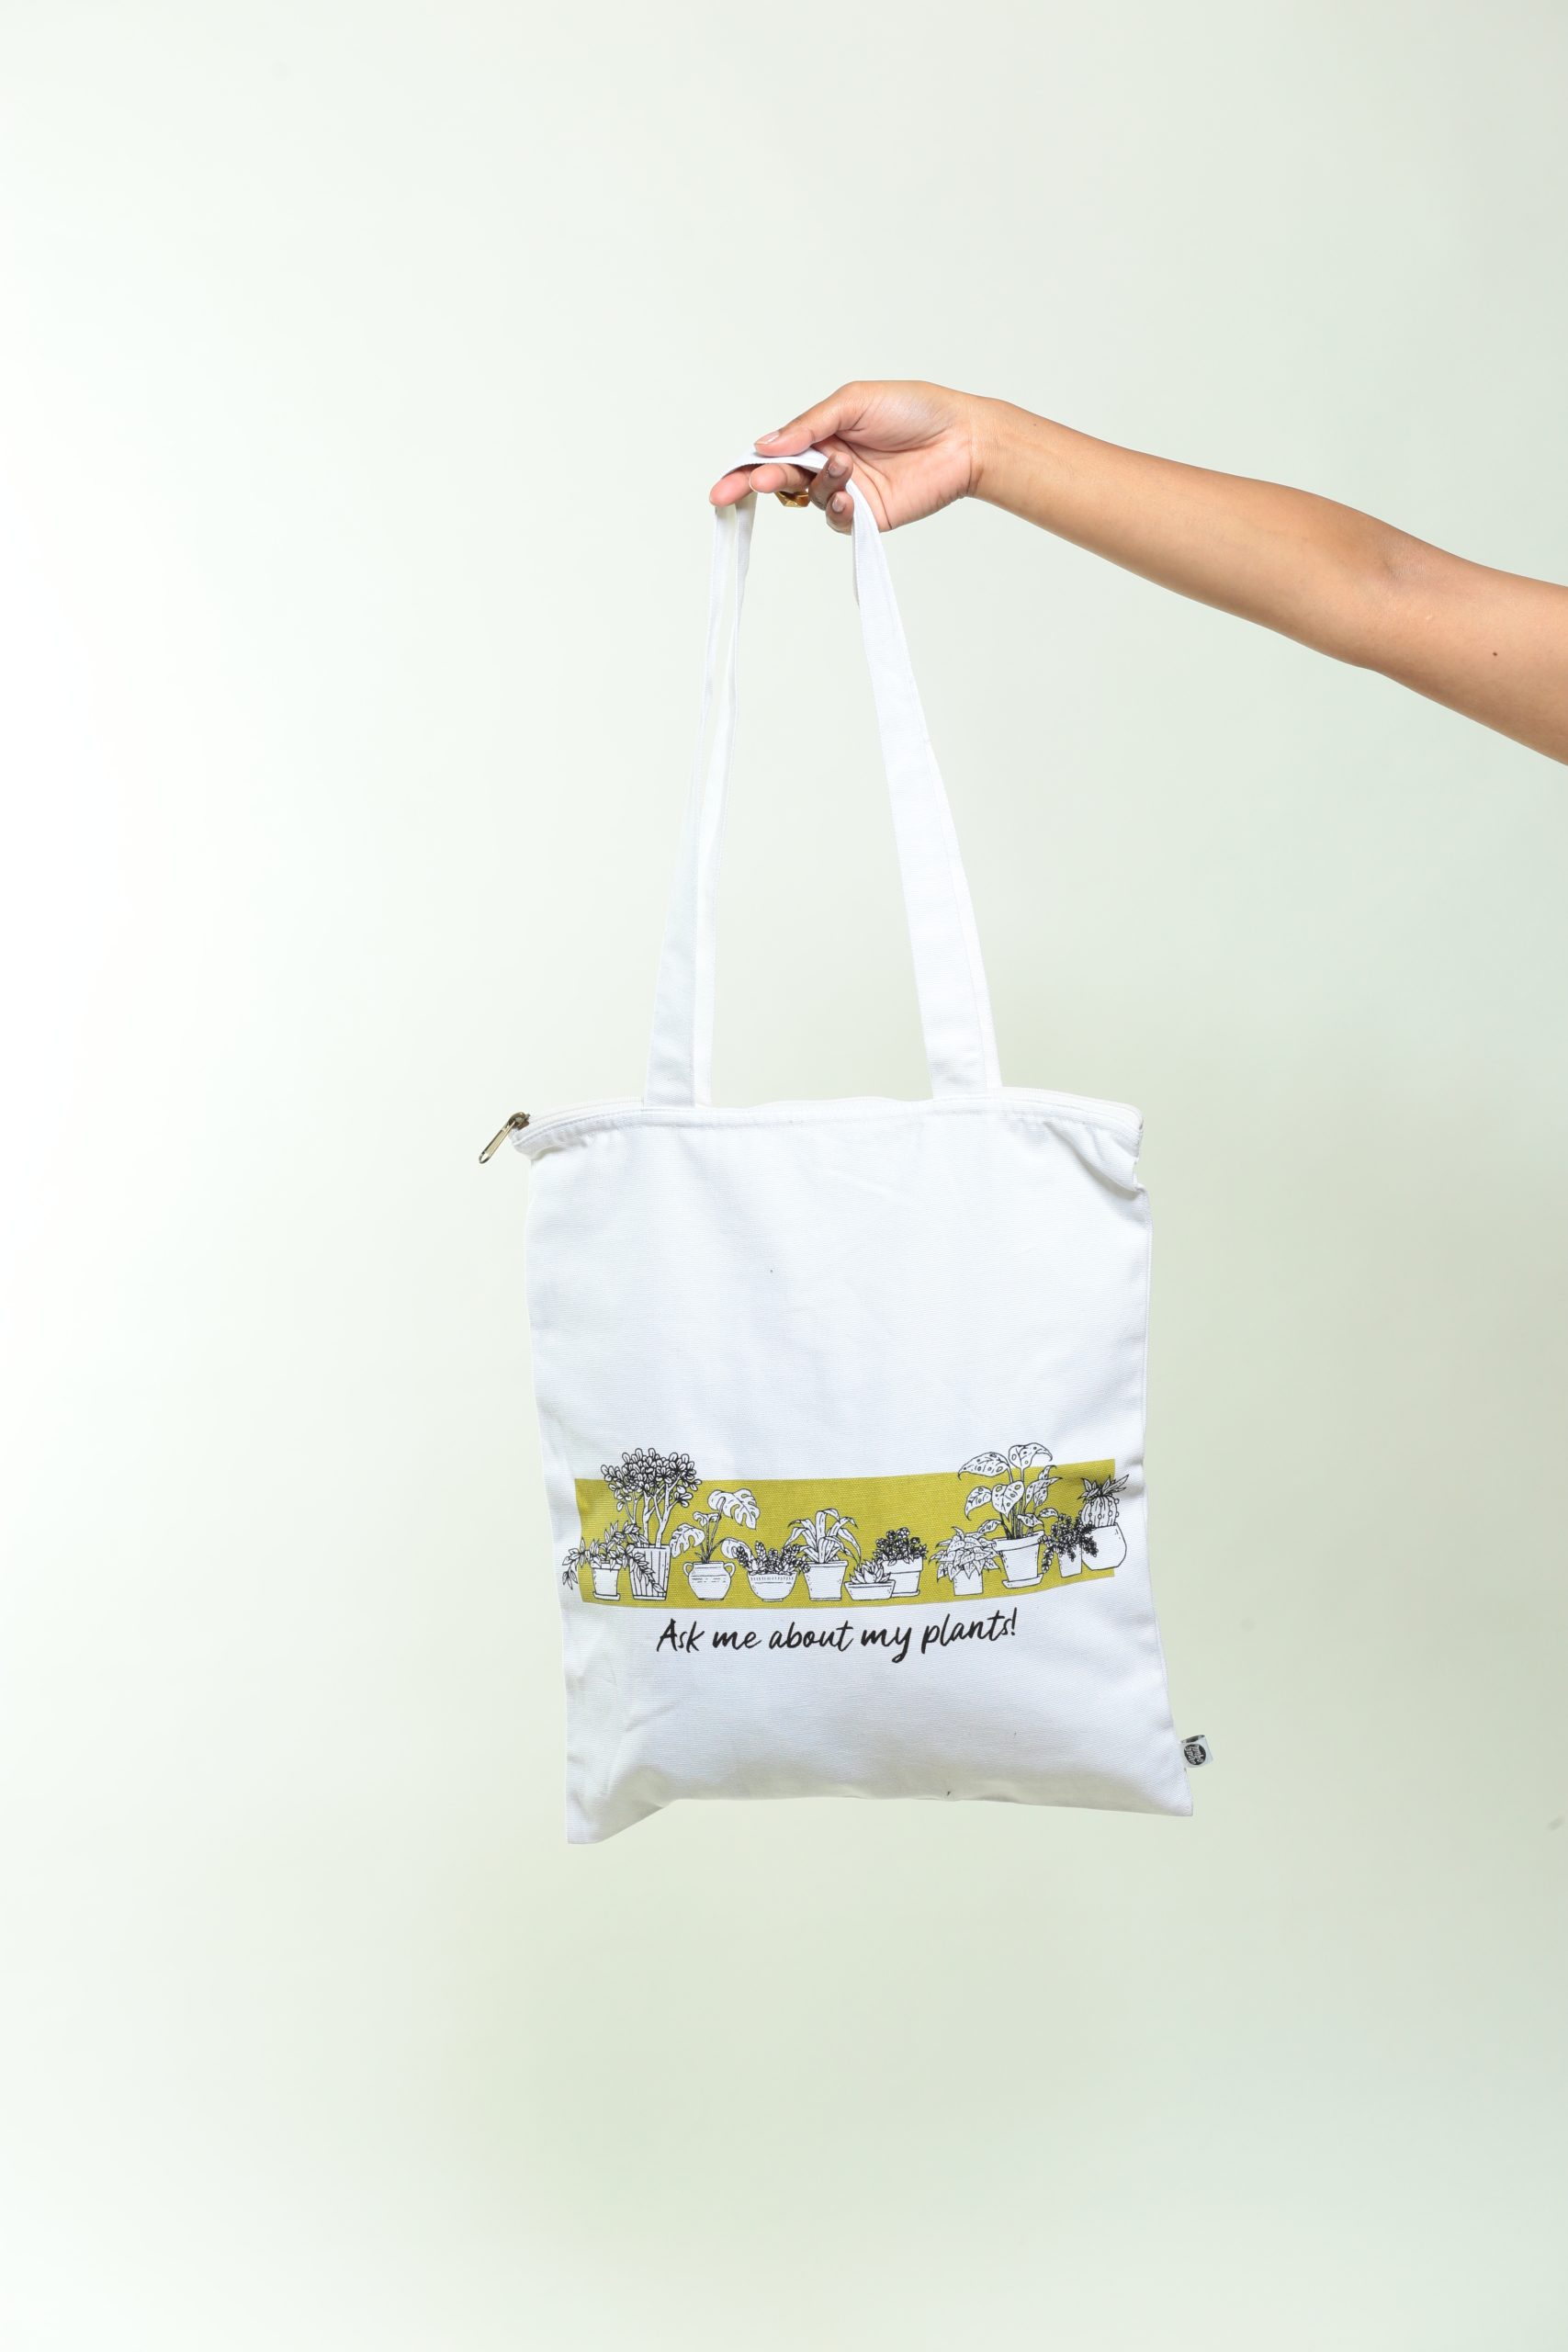 Product: Wear Equal House Plants Zippered Organic Cotton Tote Bag